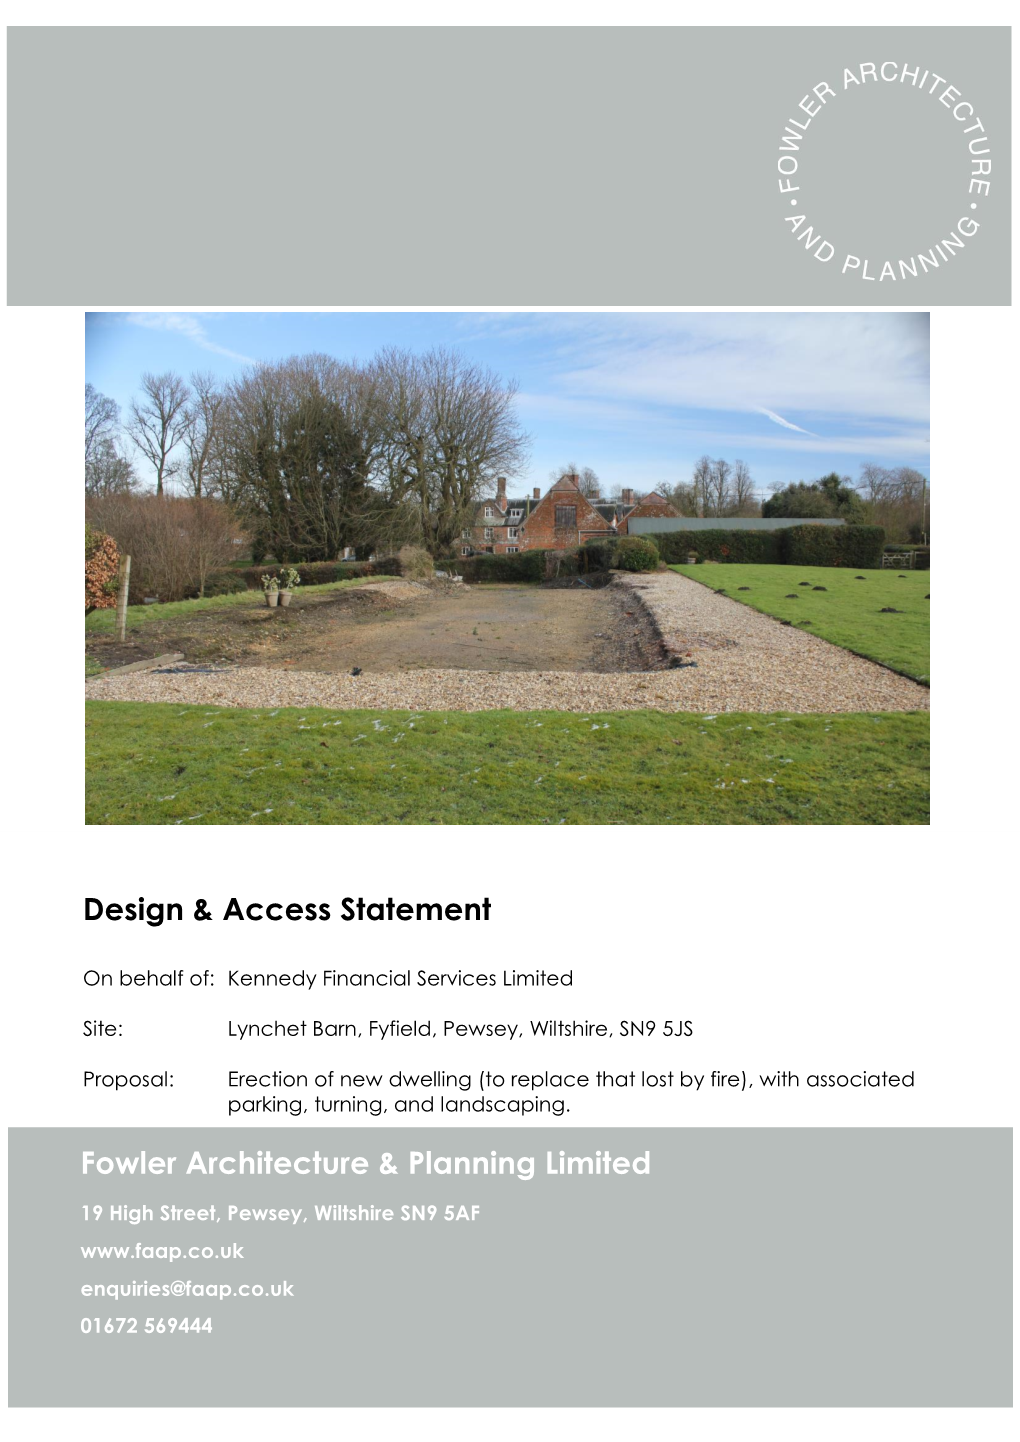 Contents Fowler Architecture & Planning Limited Design & Access